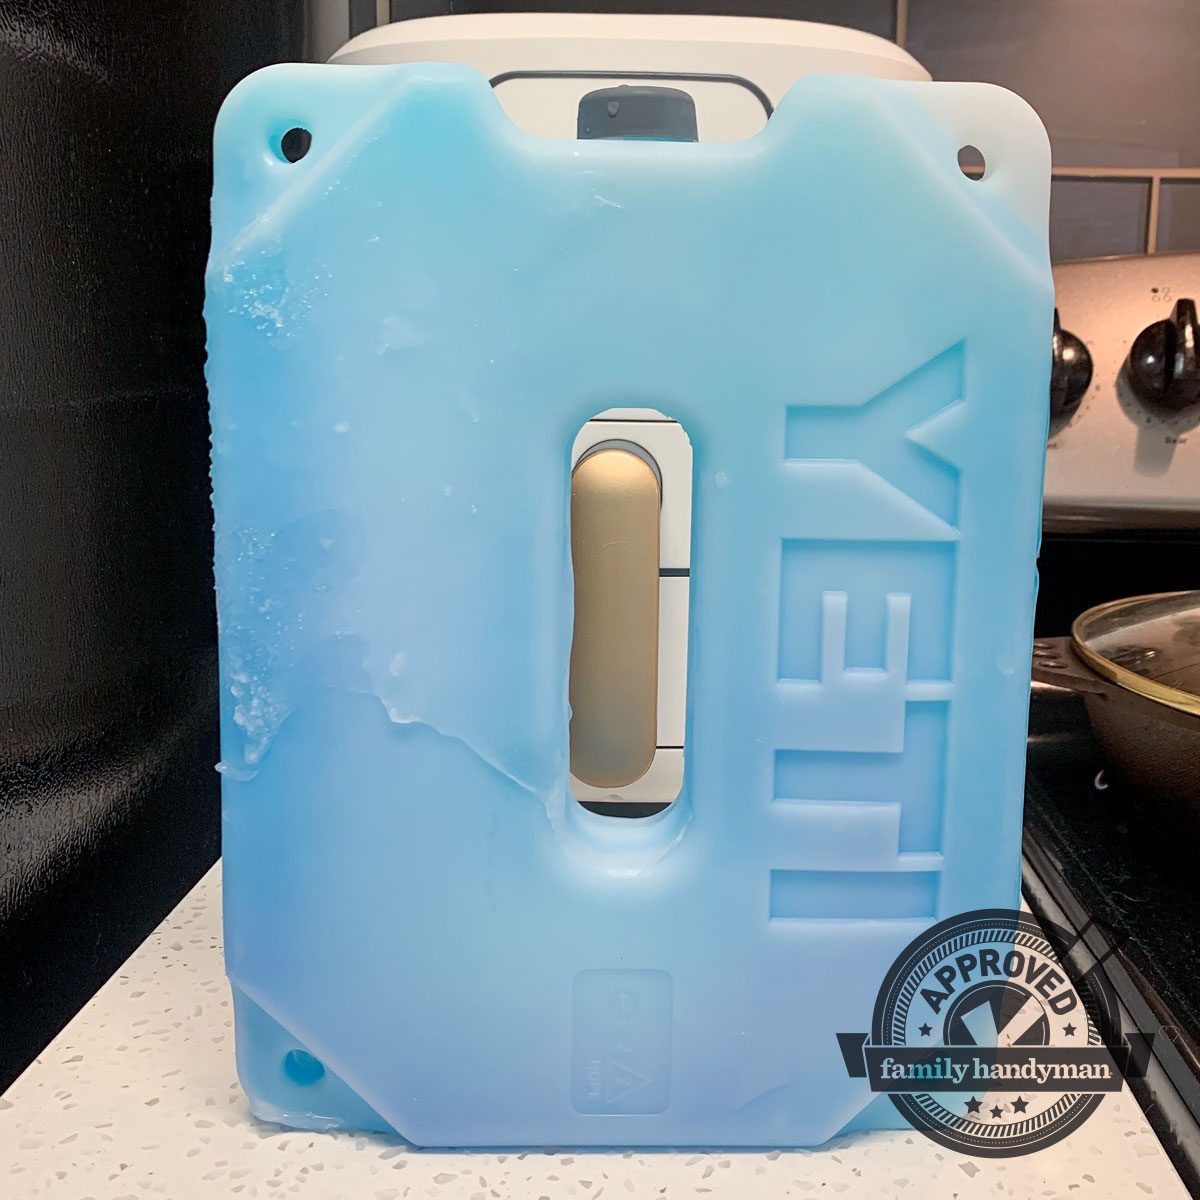 https://www.familyhandyman.com/wp-content/uploads/2023/08/FHM-The-9-Best-Yeti-Products-Our-Editors-Tested-and-Loved-Yeti-Ice-Mary-Henn-Family-Handyman-Yeti-Ice_KSedit.jpg?fit=700%2C700